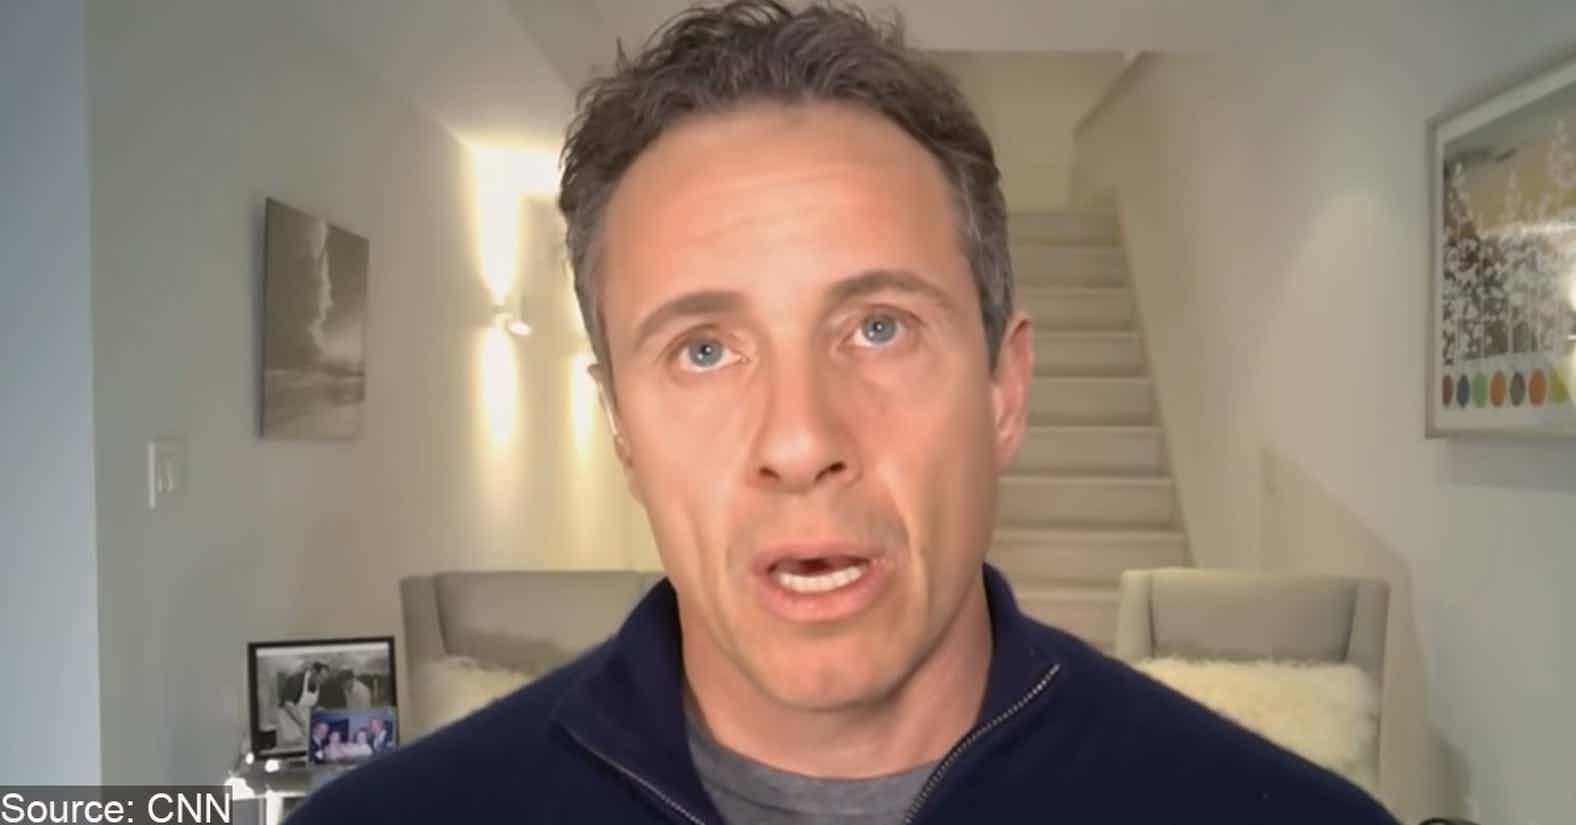 65-Year-Old Bicyclist Catches Chris Cuomo Breaking Quarantine, Gets Threatened